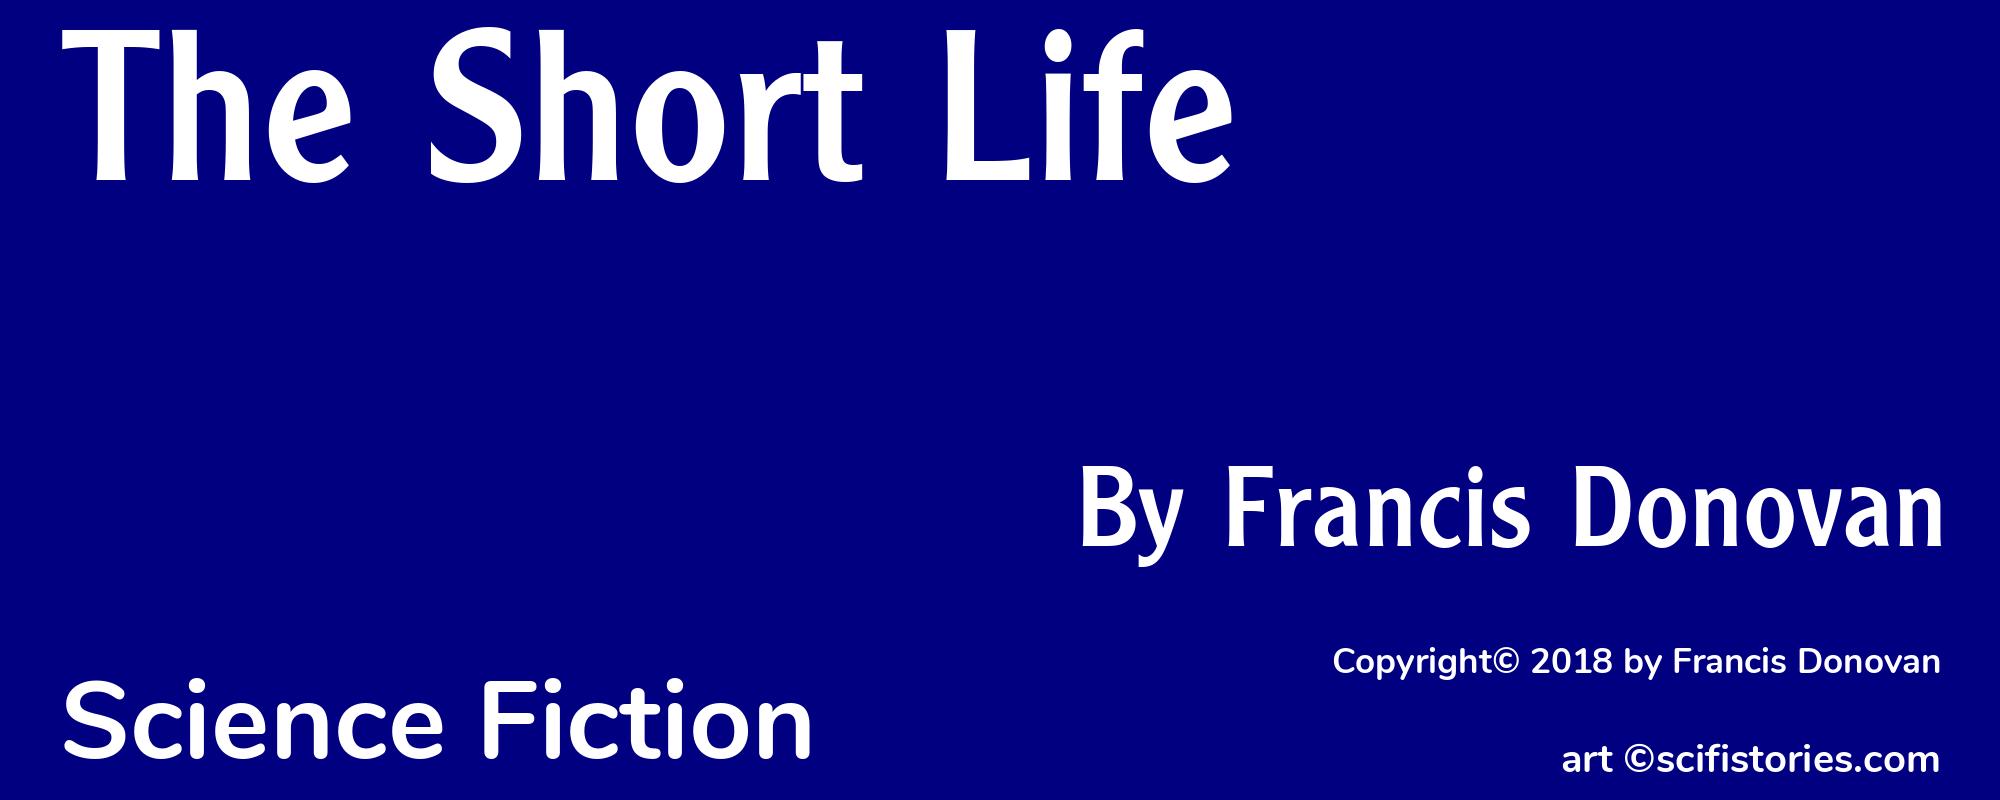 The Short Life - Cover